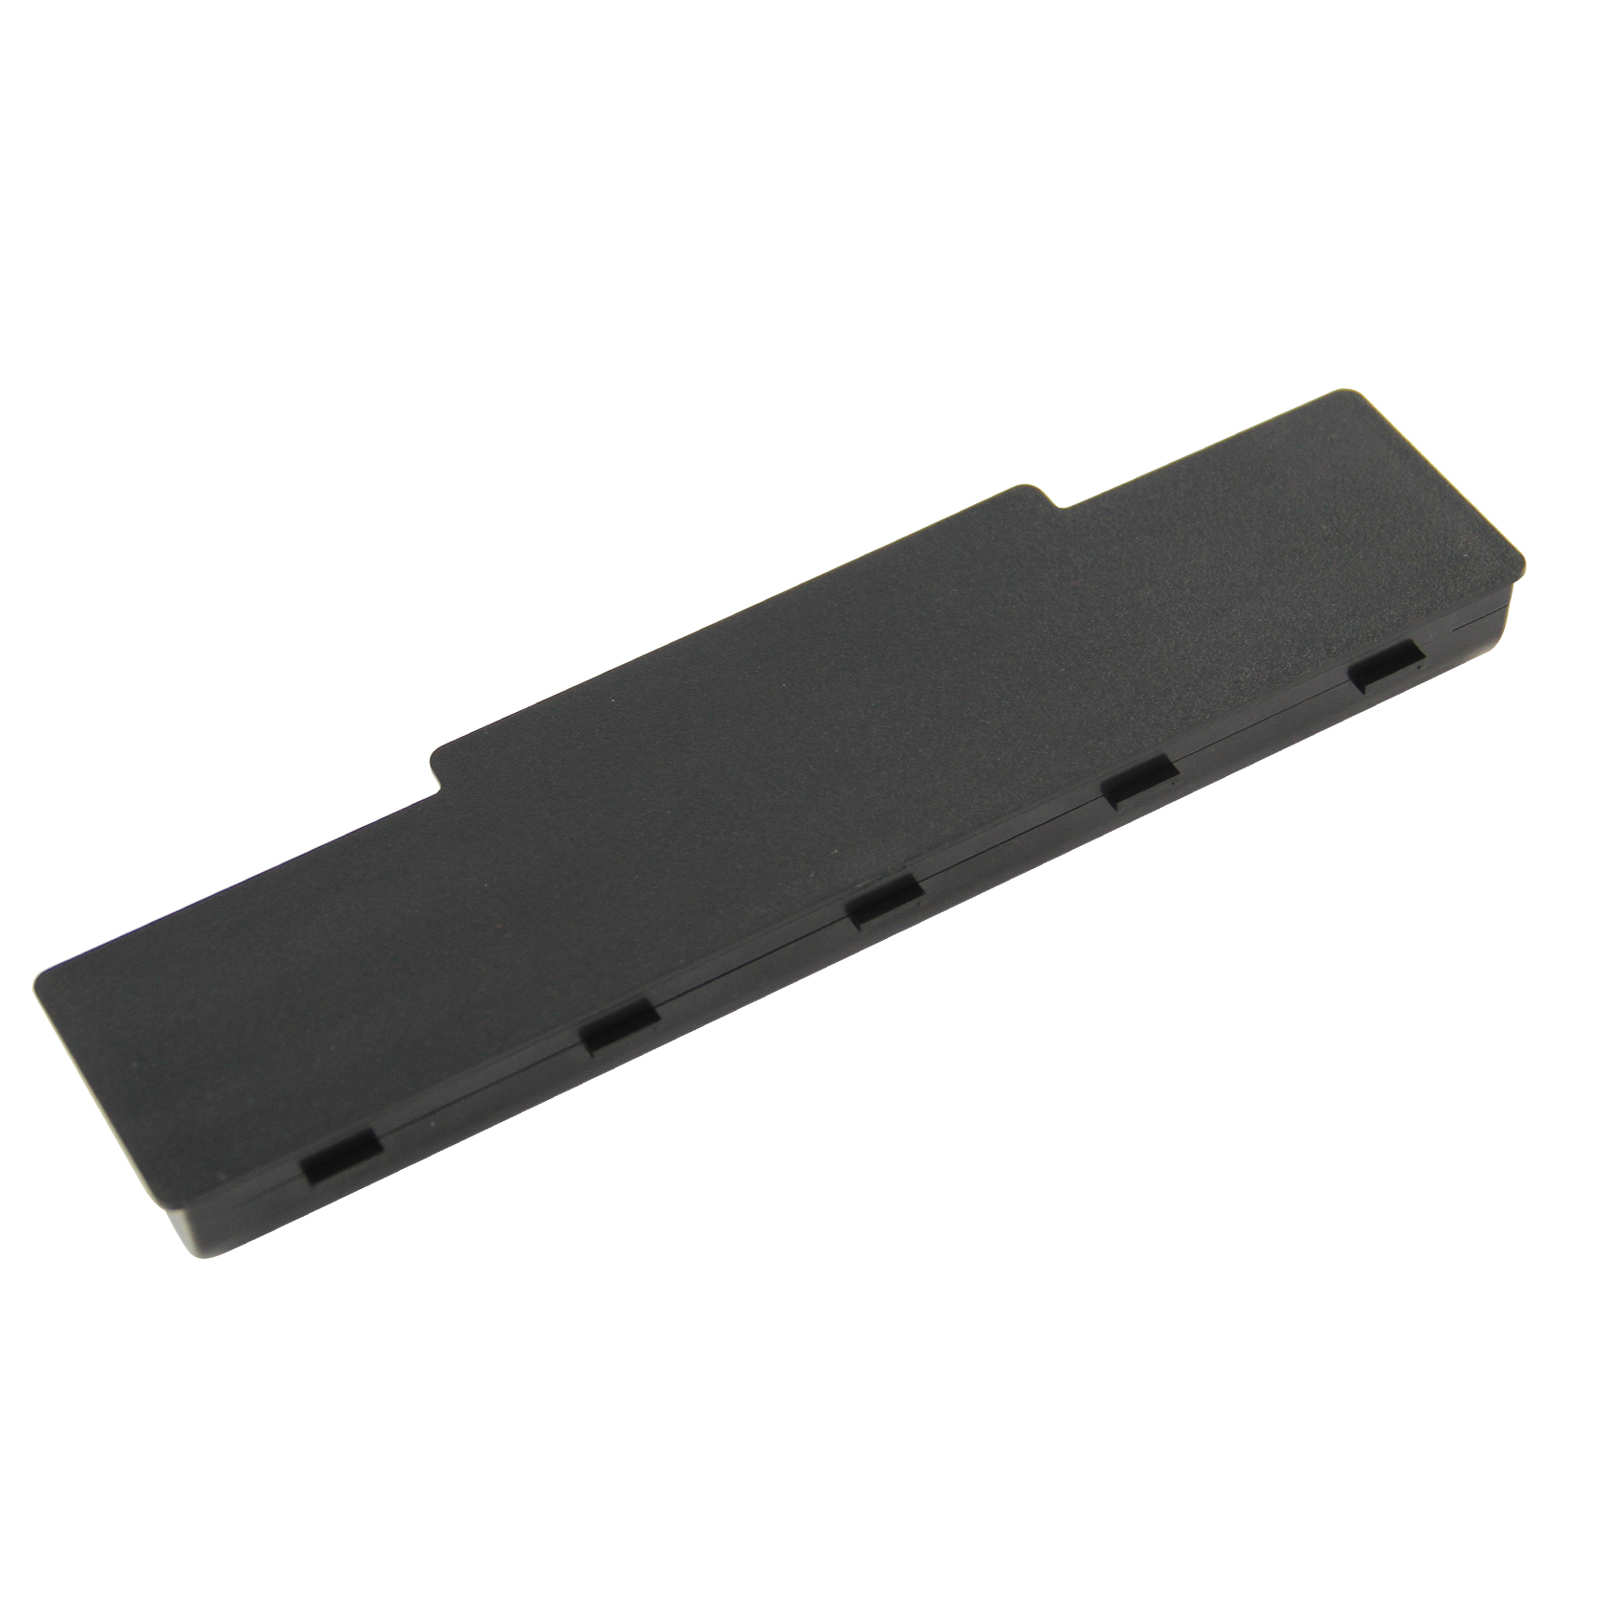 6 Cell Battery for Acer Aspire 5516 5517 5532 5334 5732z AS09A31 AS09A41 AS09A61 - image 4 of 4